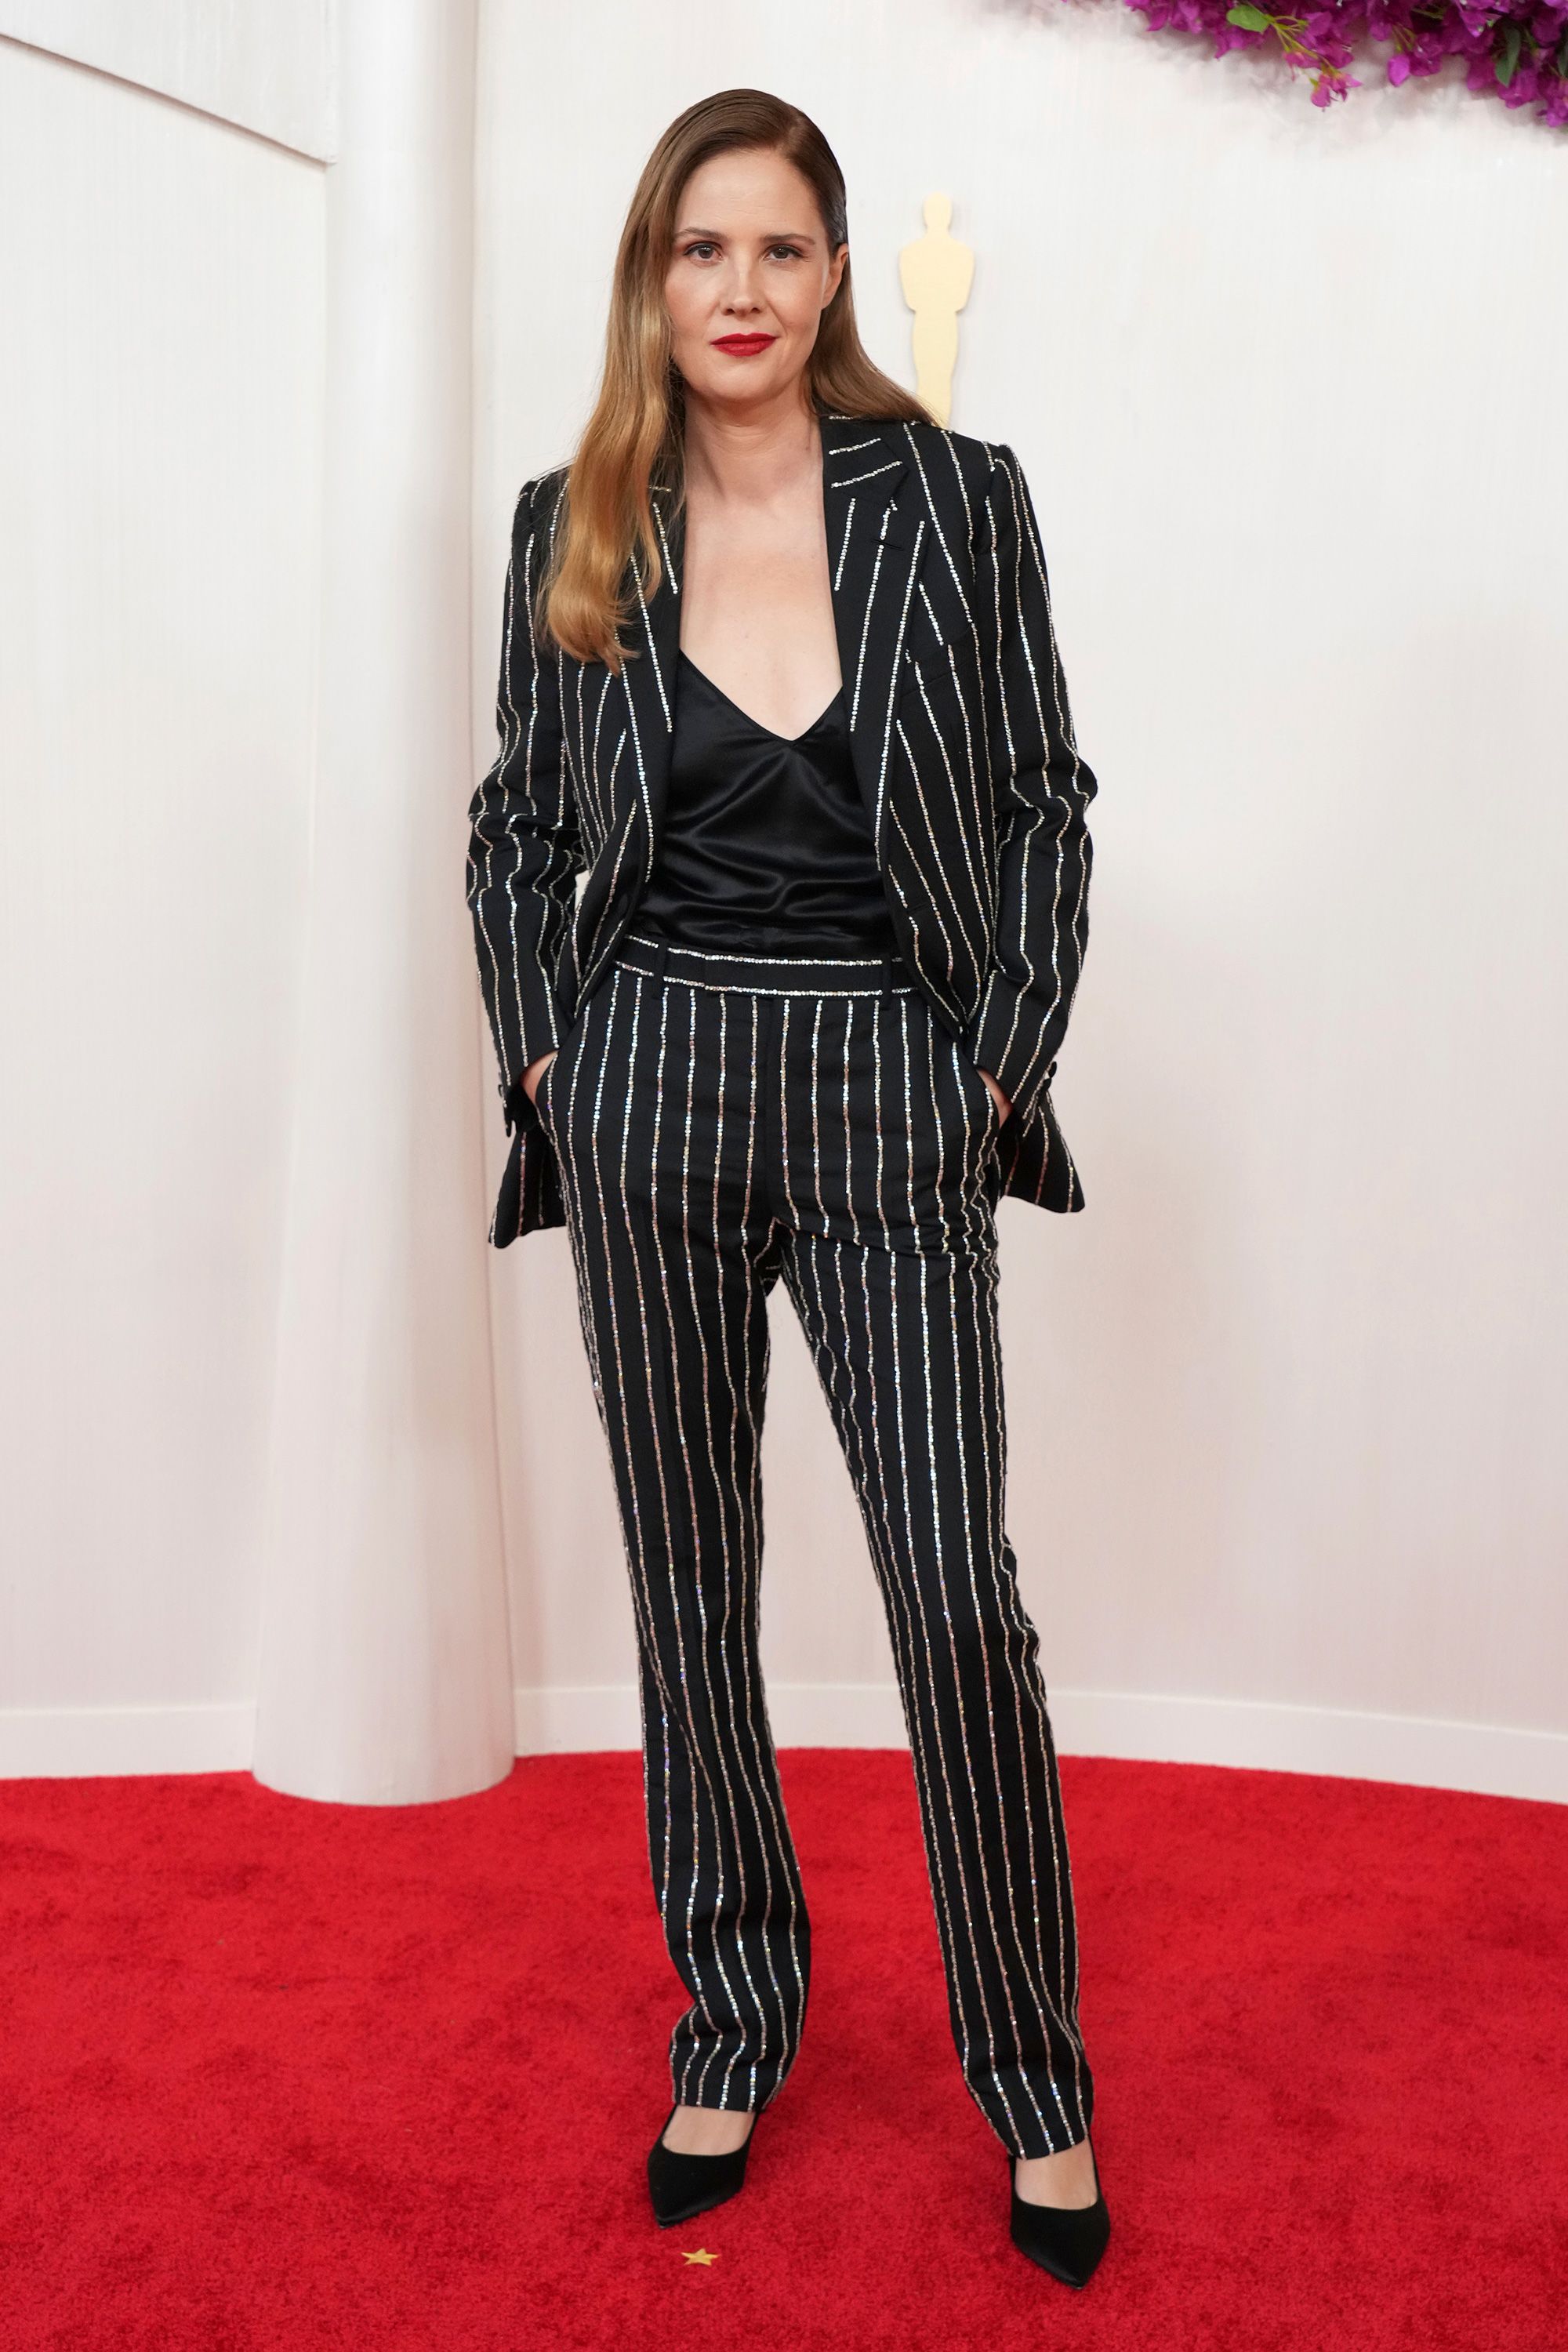 Justine Triet, who later picked up the Best Original Screenplay Oscar for “Anatomy of a Fall,” wore a sparkly striped Louis Vuitton suit with a satin top and black pumps.